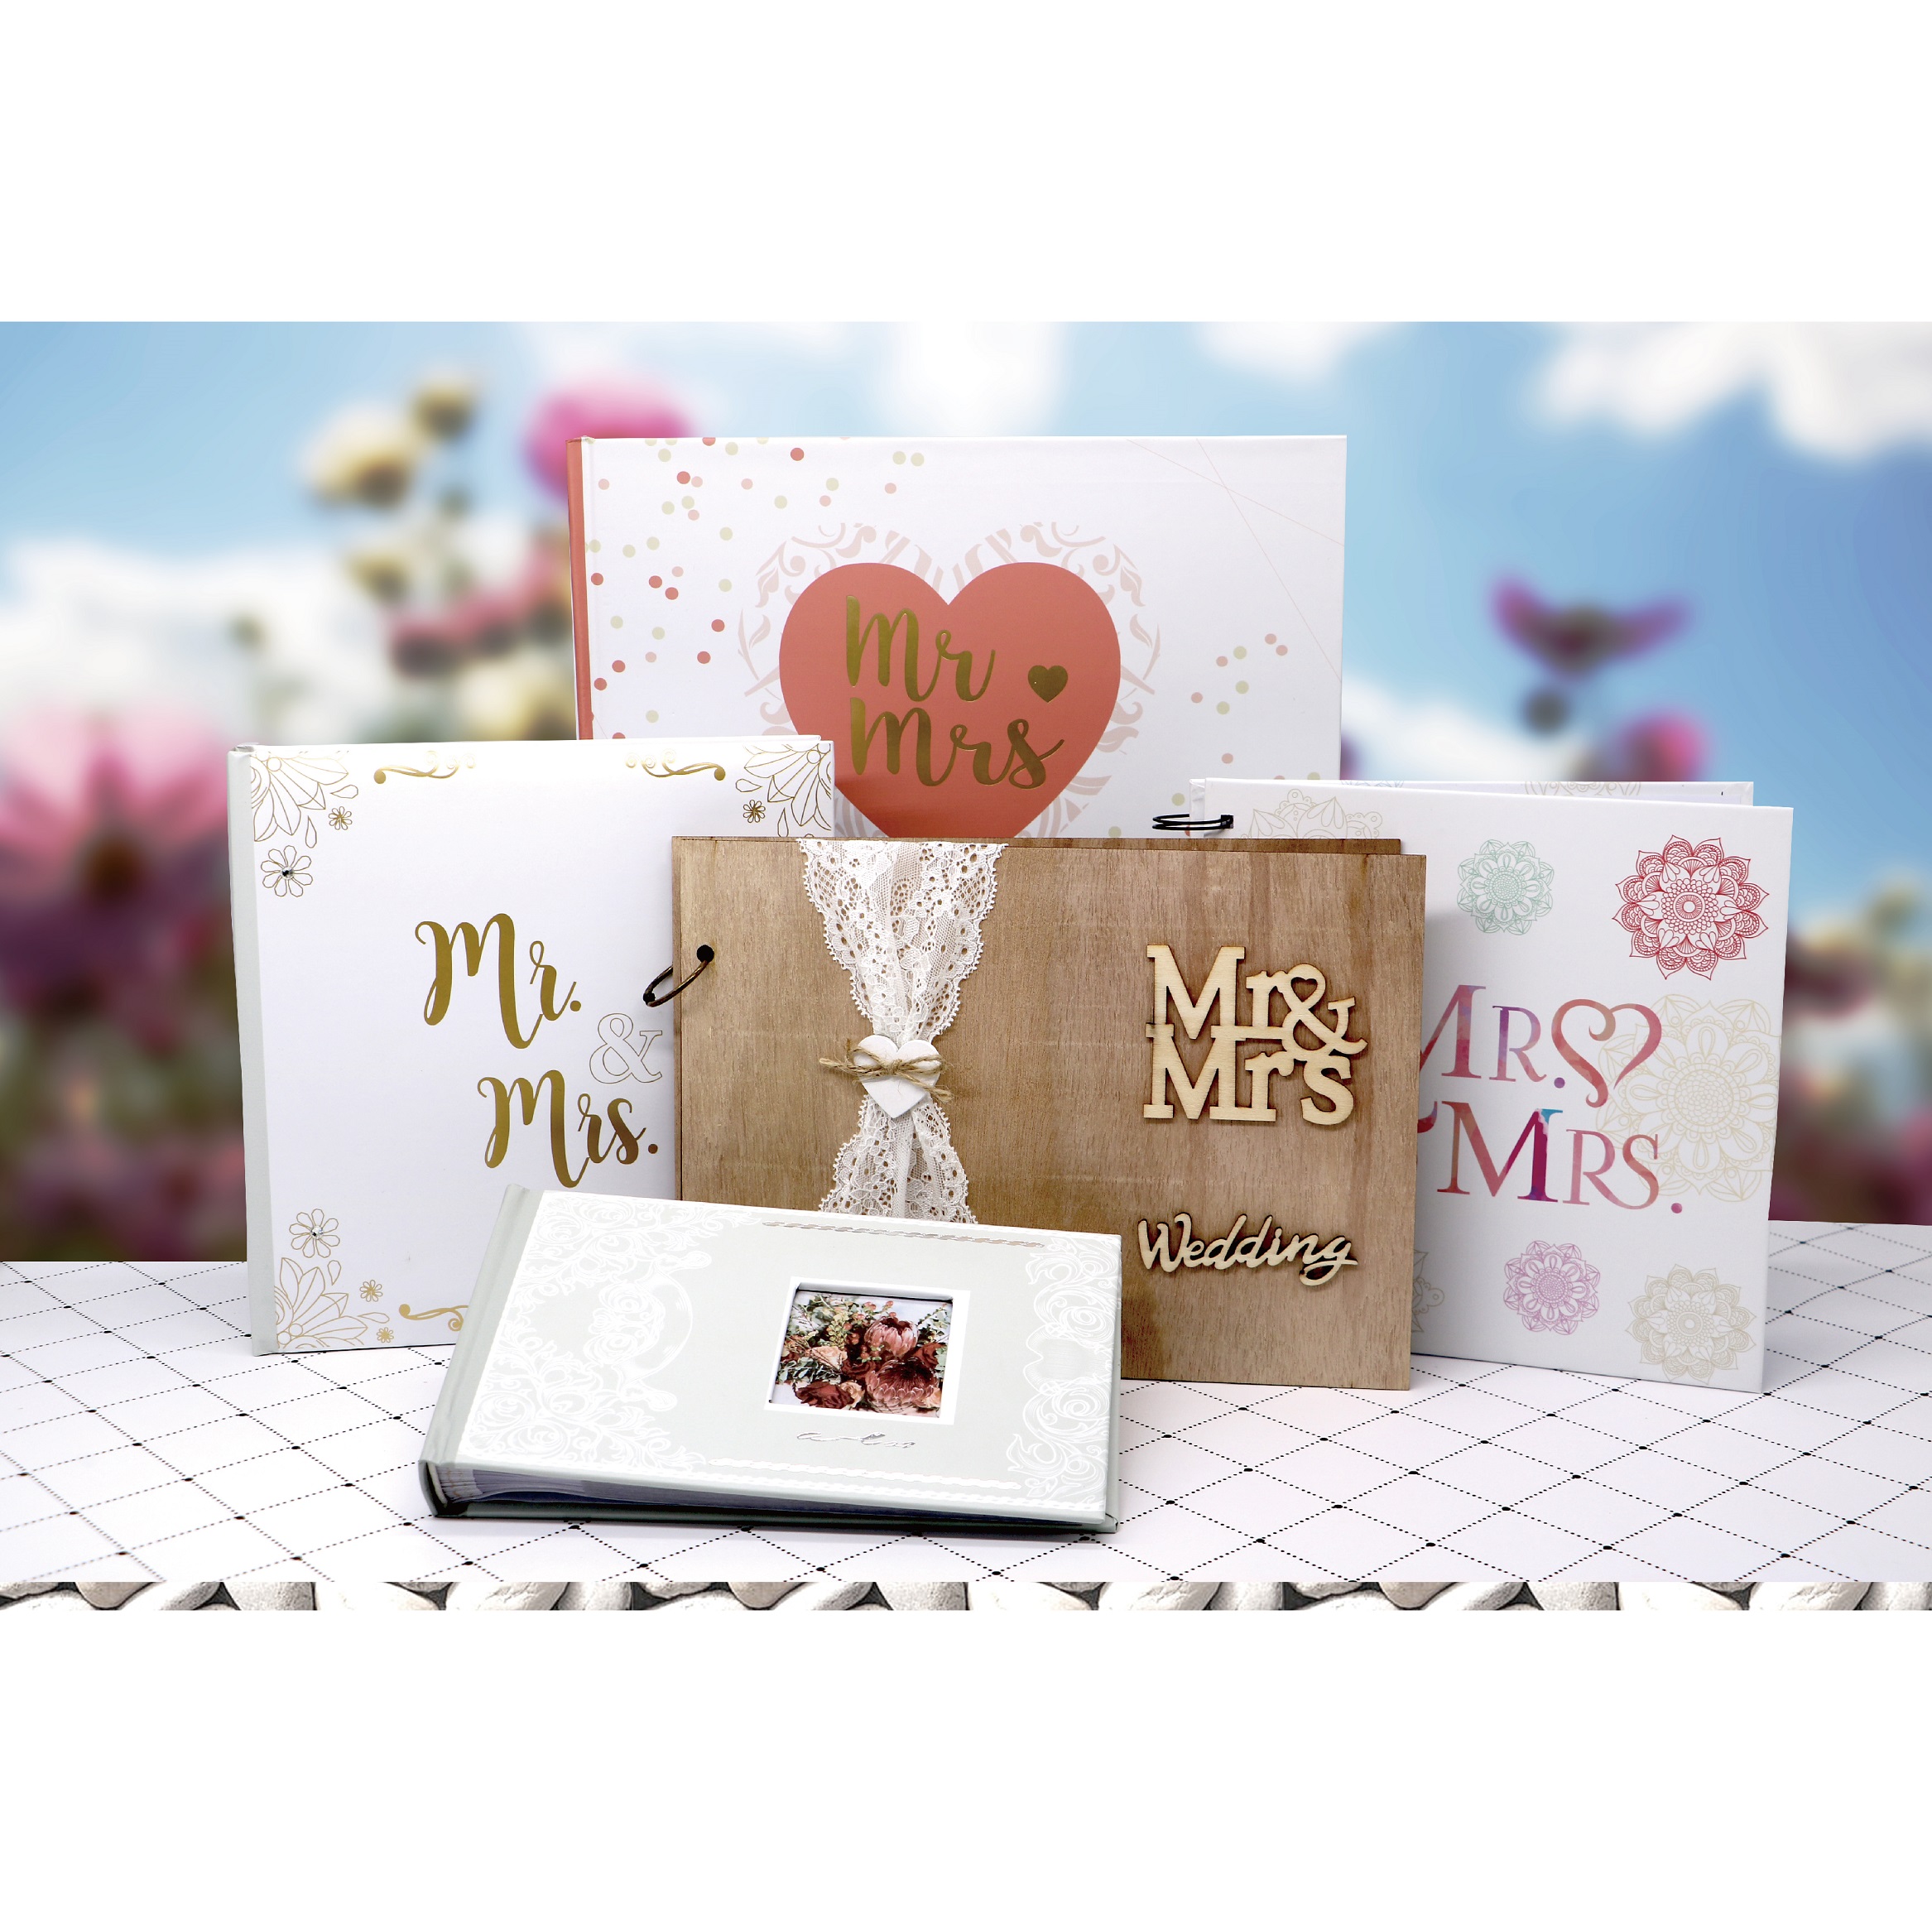 MR&MRS Wedding albums, Memories record photo albums for 4X6 inch photos